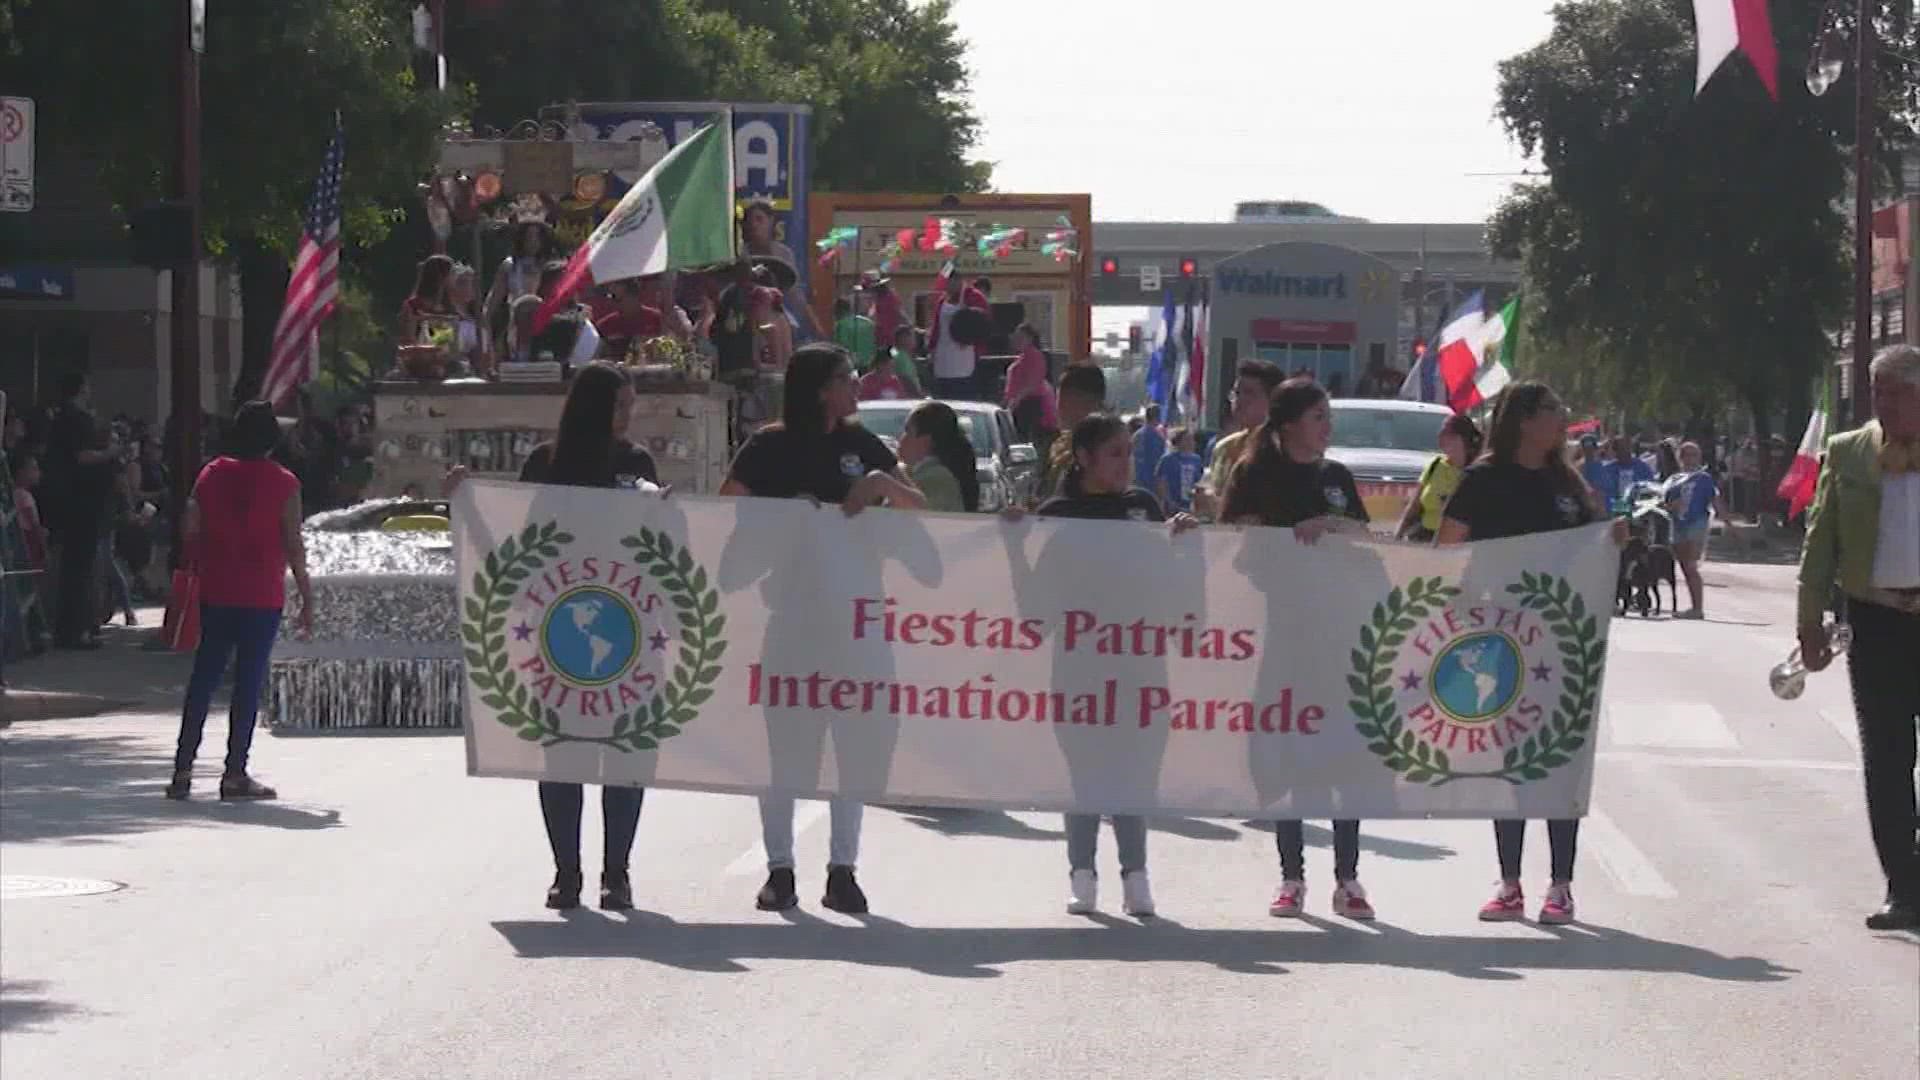 Organizers of the annual parade say they are worried about the safety of crowds without sufficient security.